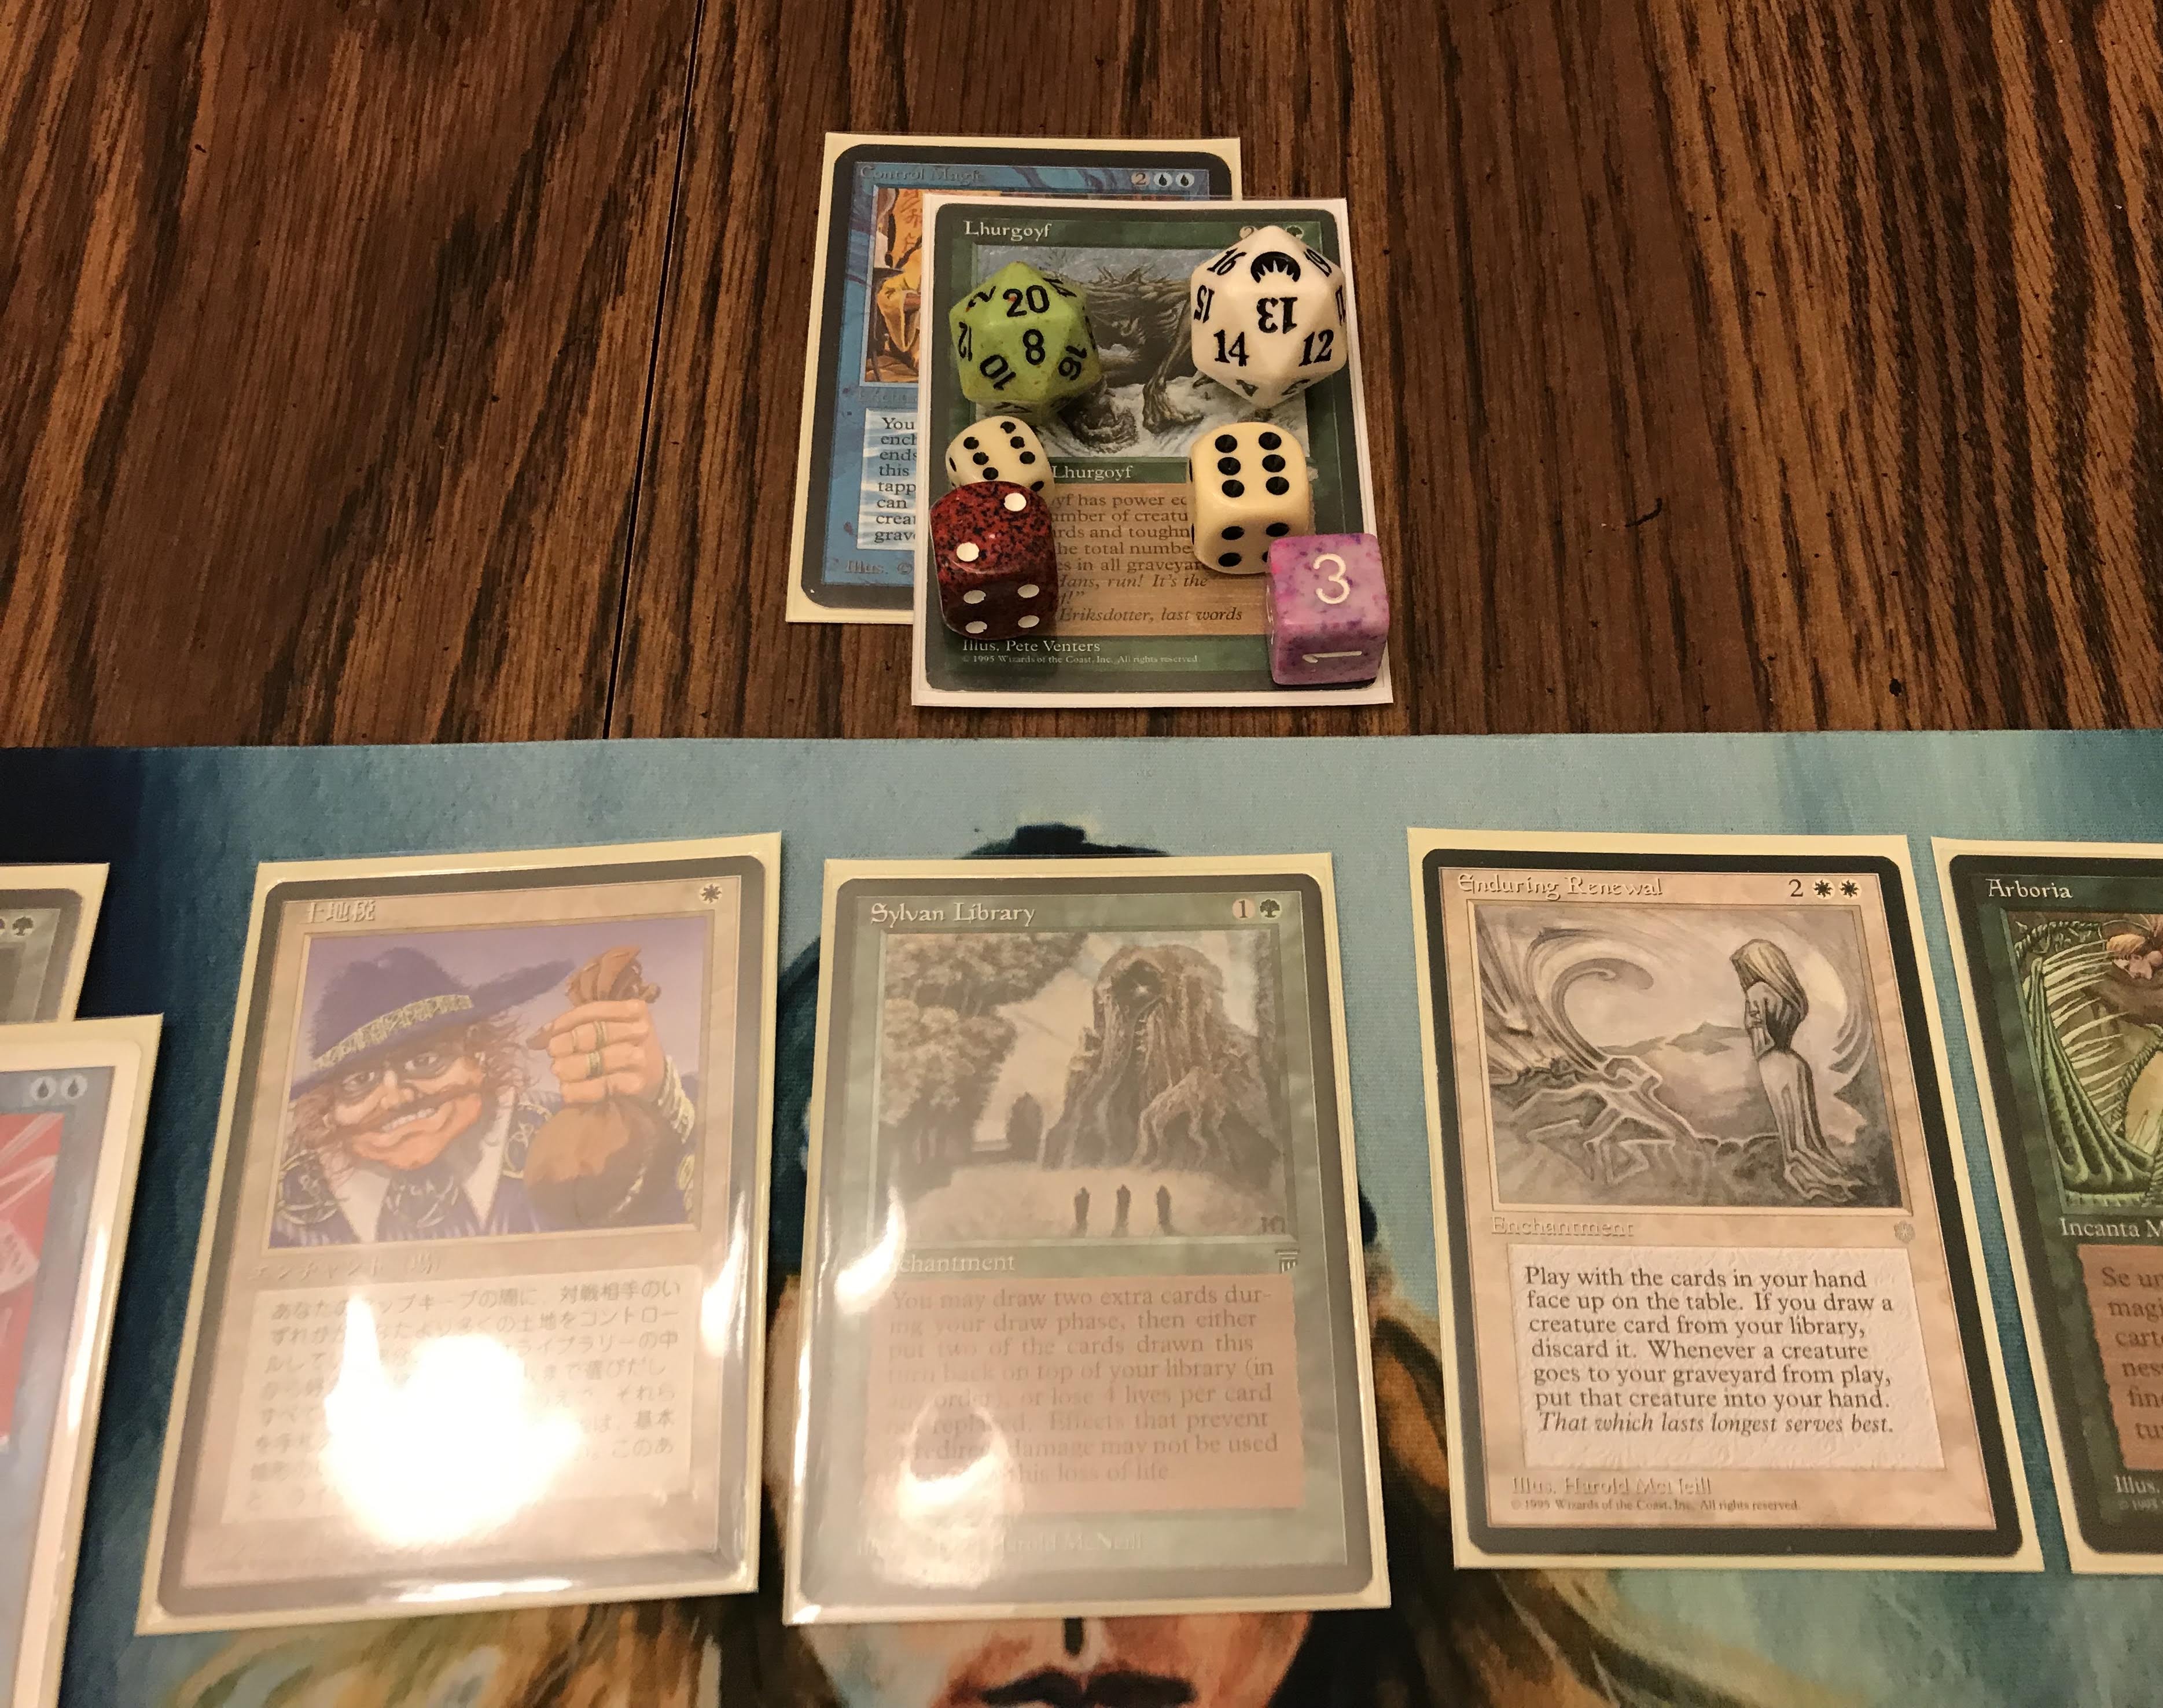 A massive Lhurgoyf prowls the battlefield in a game of OS95-EDH